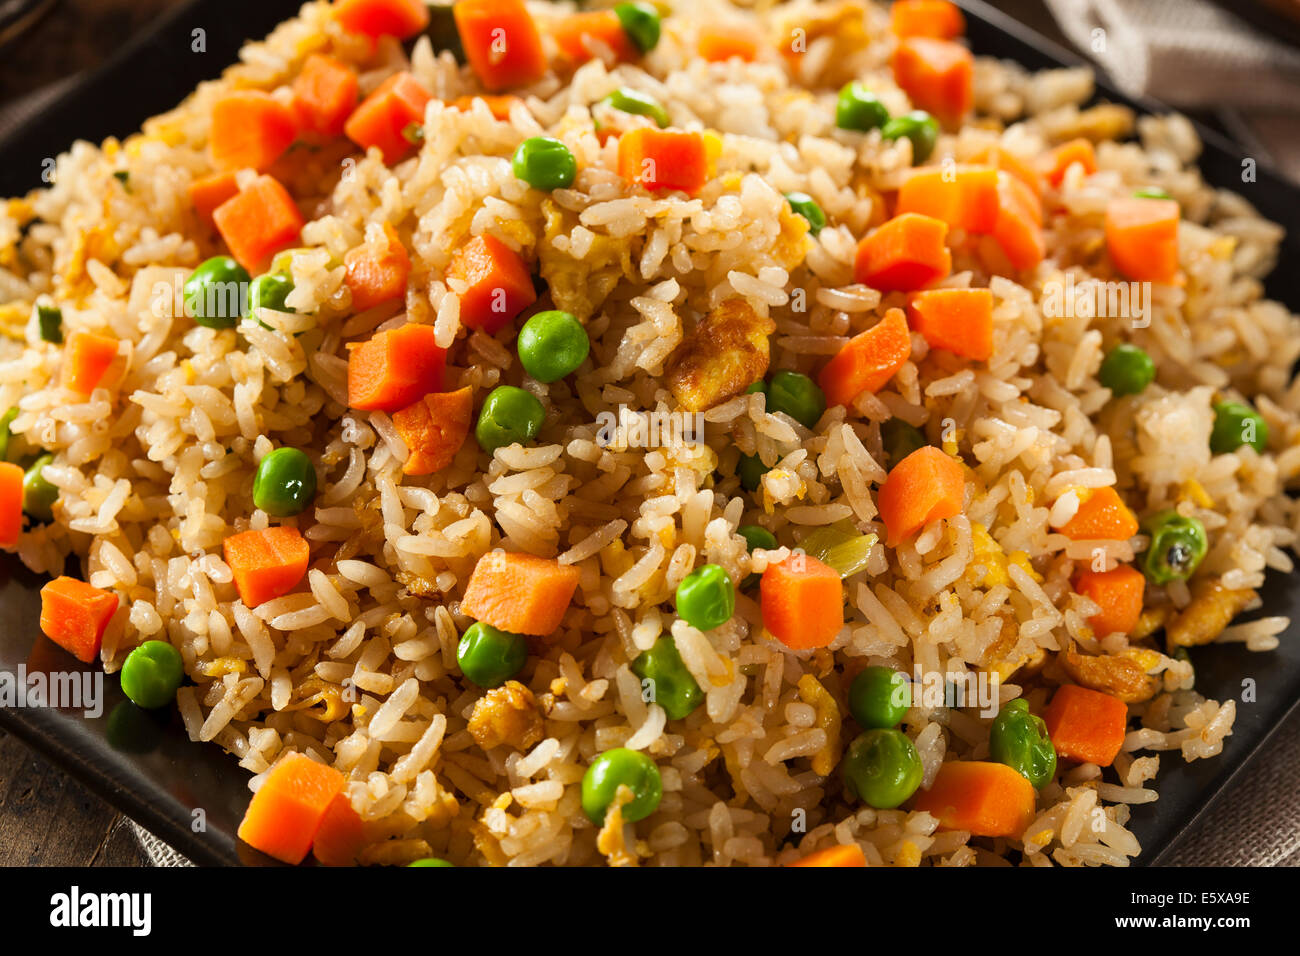 Healthy Homemade Fried Rice with Carrots and Peas Stock Photo